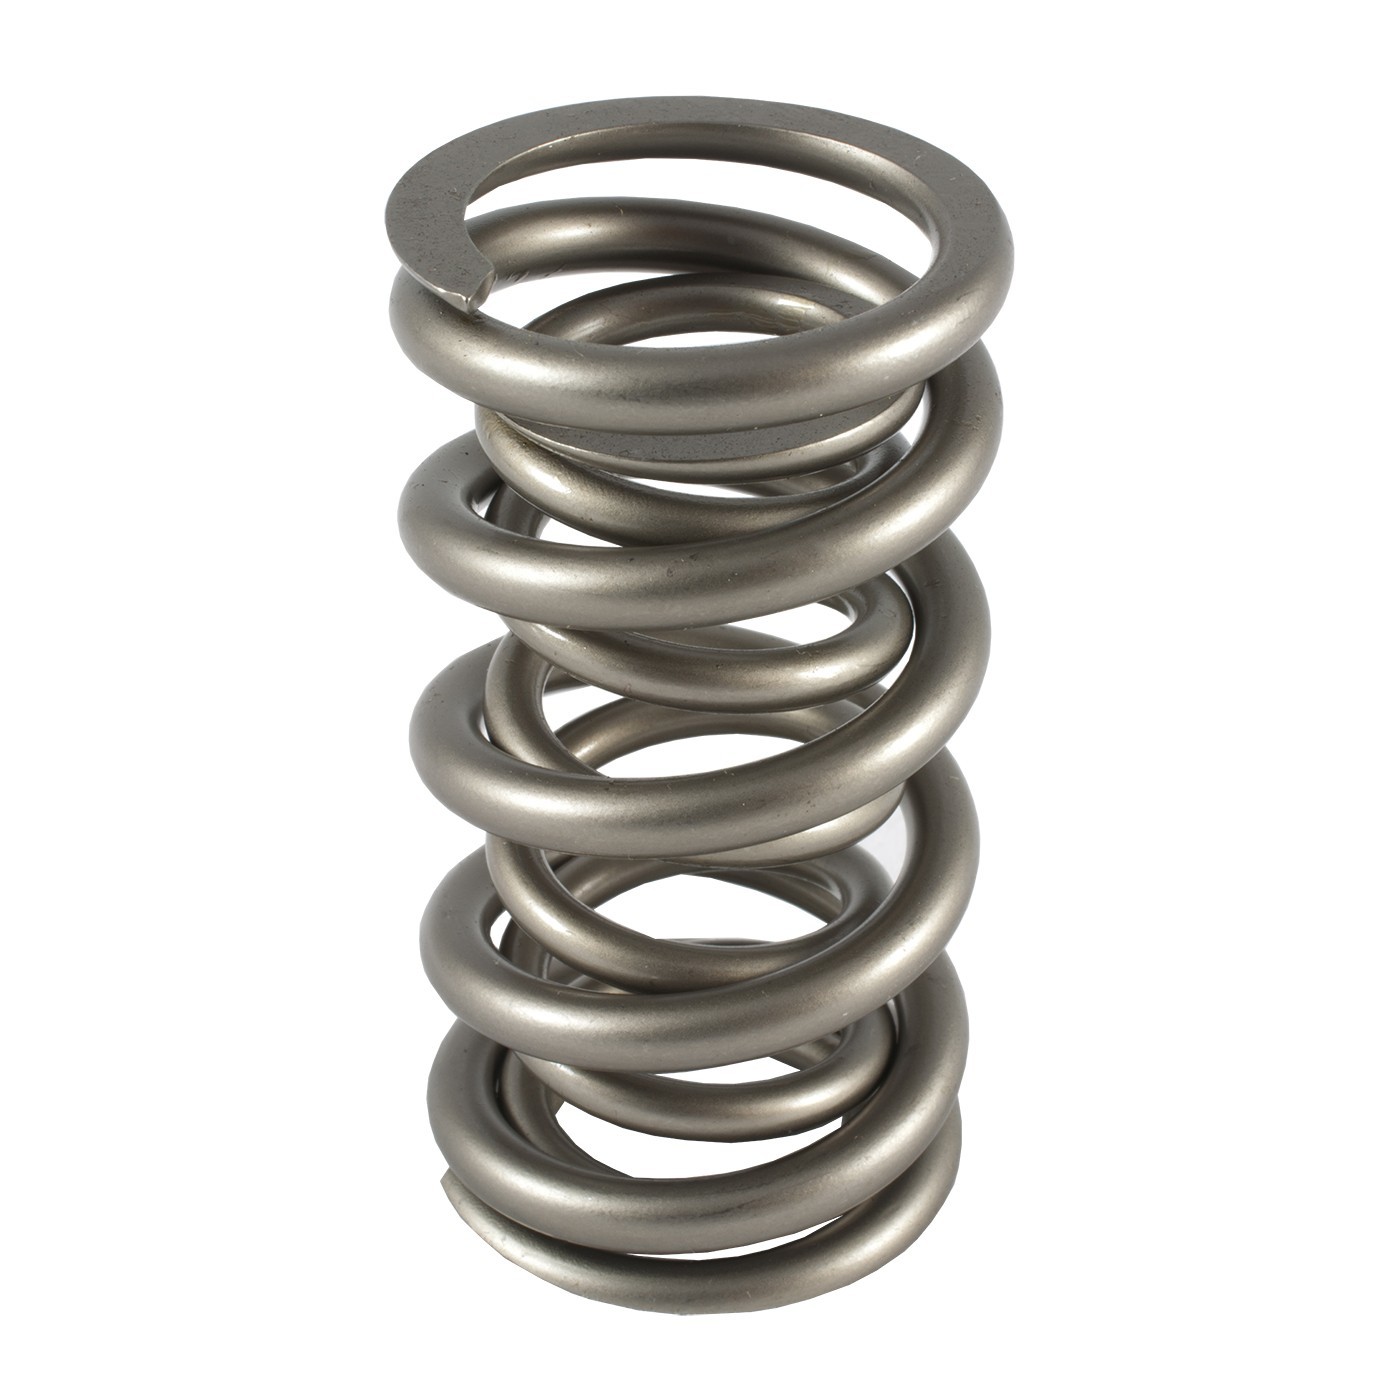 PAC Springs PAC-1208X-1 Valve Spring, RPM Series, Dual Spring, 460 lb/in Spring Rate, 1.000 in Coil Bind, 1.324 in OD, GM LS-Series, Each